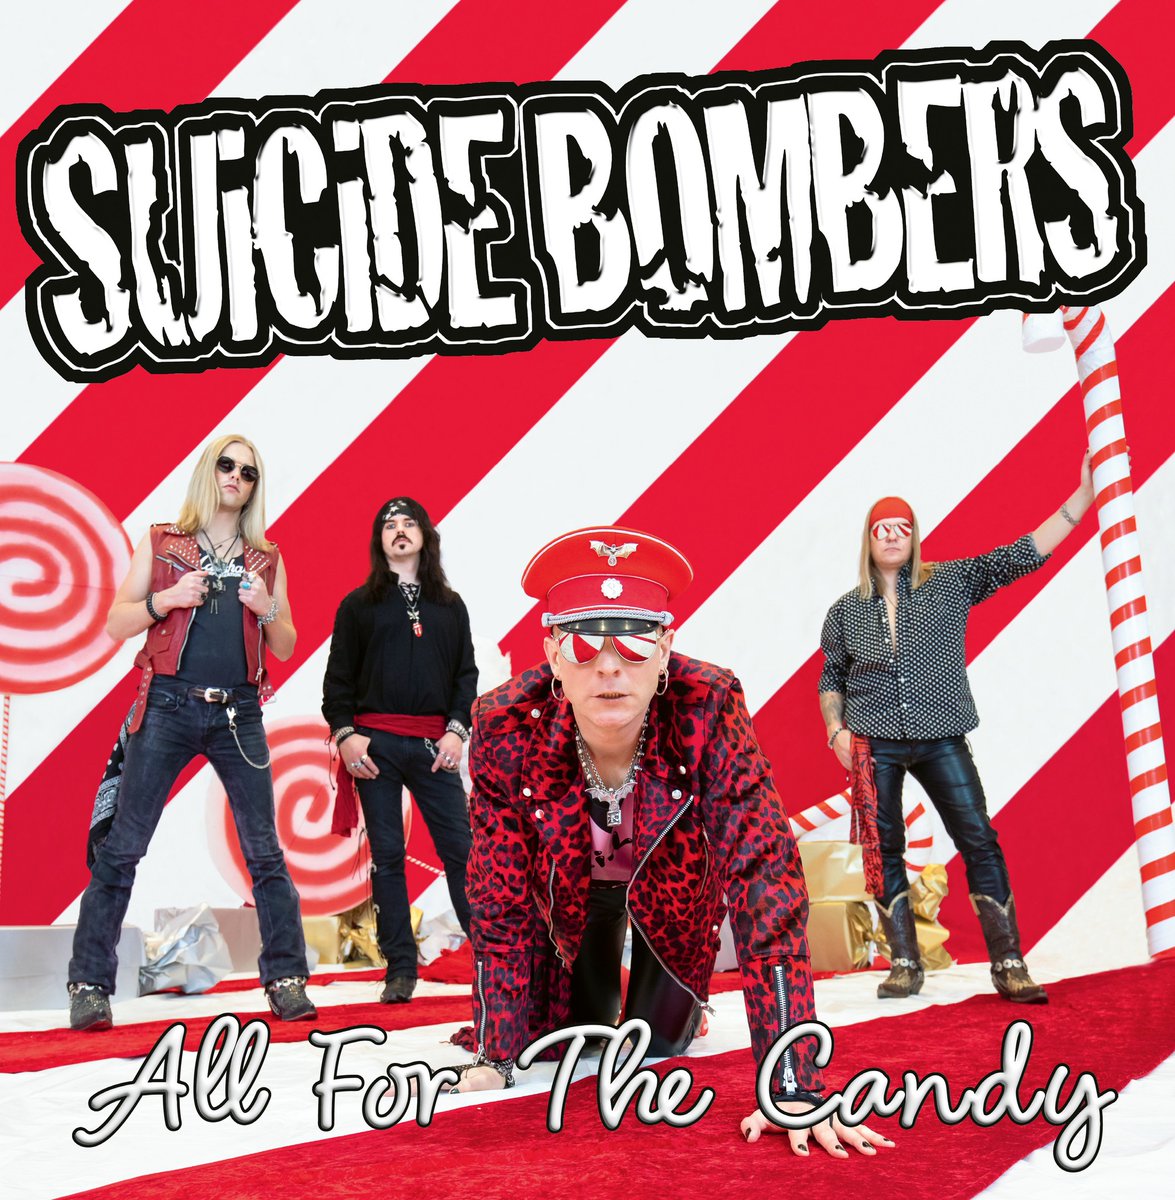 📢In the event it went unnoticed ...™️
SUICIDE BOMBERS All For The Candy (2/2/24) 🇳🇴
Excellent new studio full-length effort (#5 to date) by the Oslo sleazy rockers! High-octane, 80s-influenced glam metal, hard rock. #RockAintDead Spread the love!
Stream: open.spotify.com/album/4jyM7KH0…